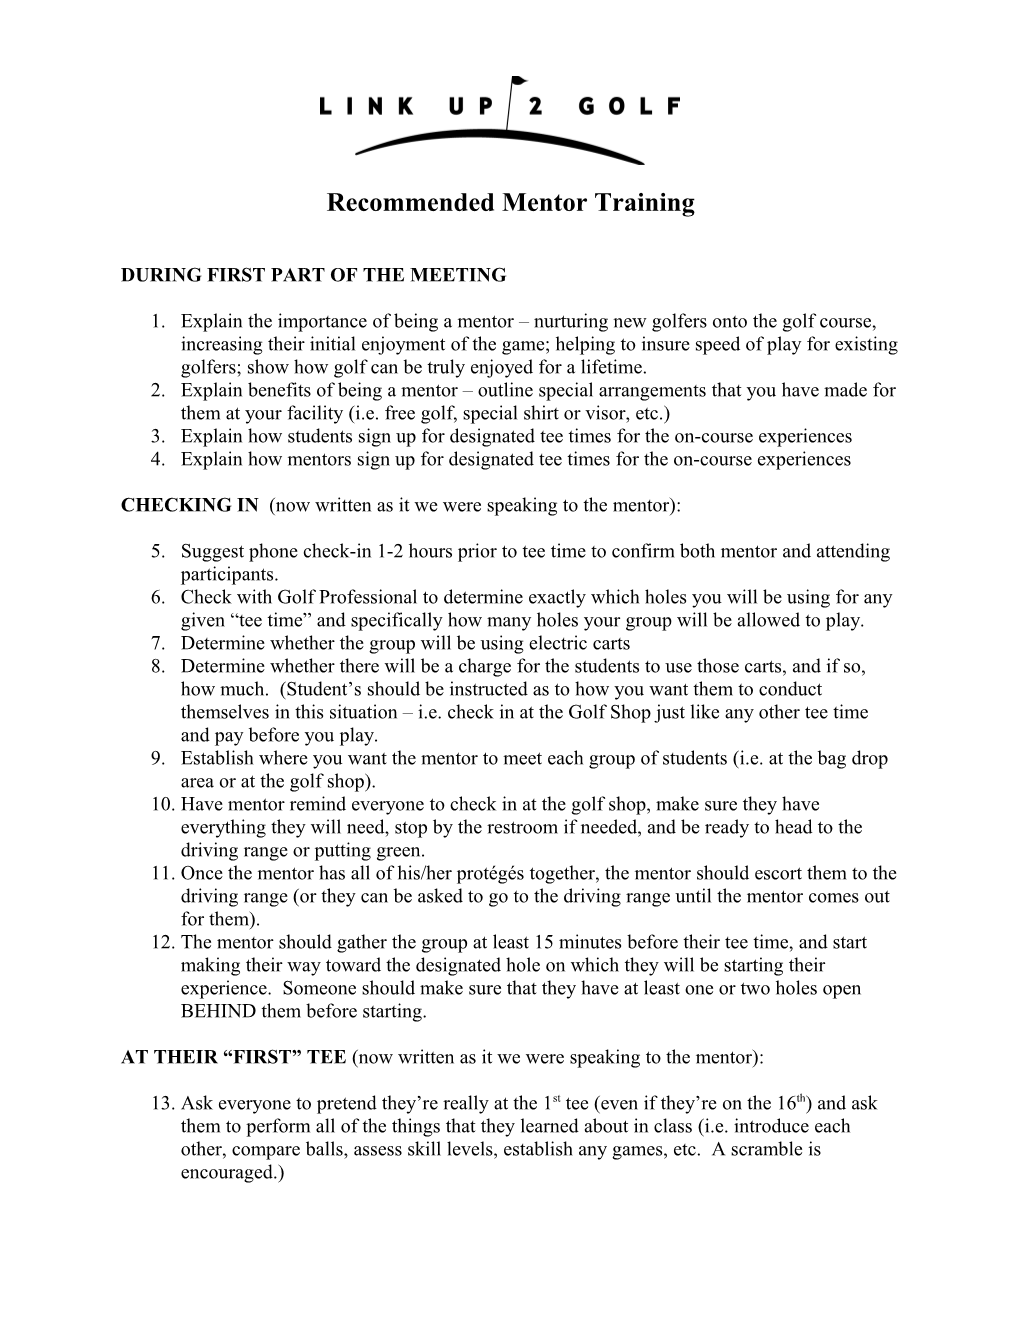 Recommended Items to Cover in Mentor Training